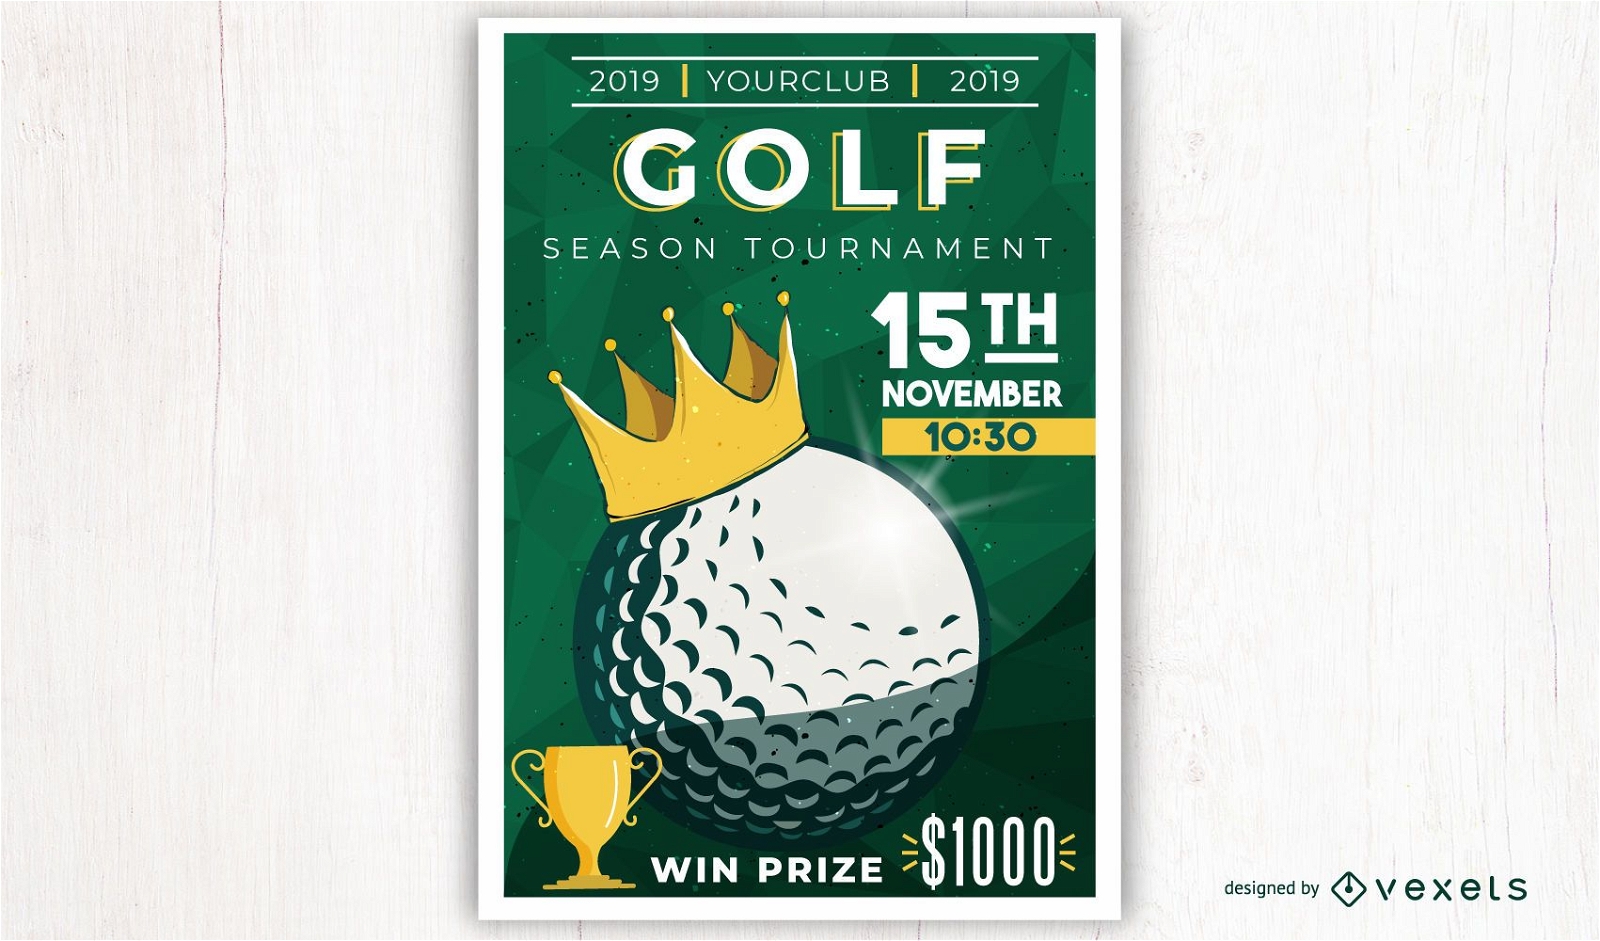 Golf tournament flyer template Royalty Free Vector Image